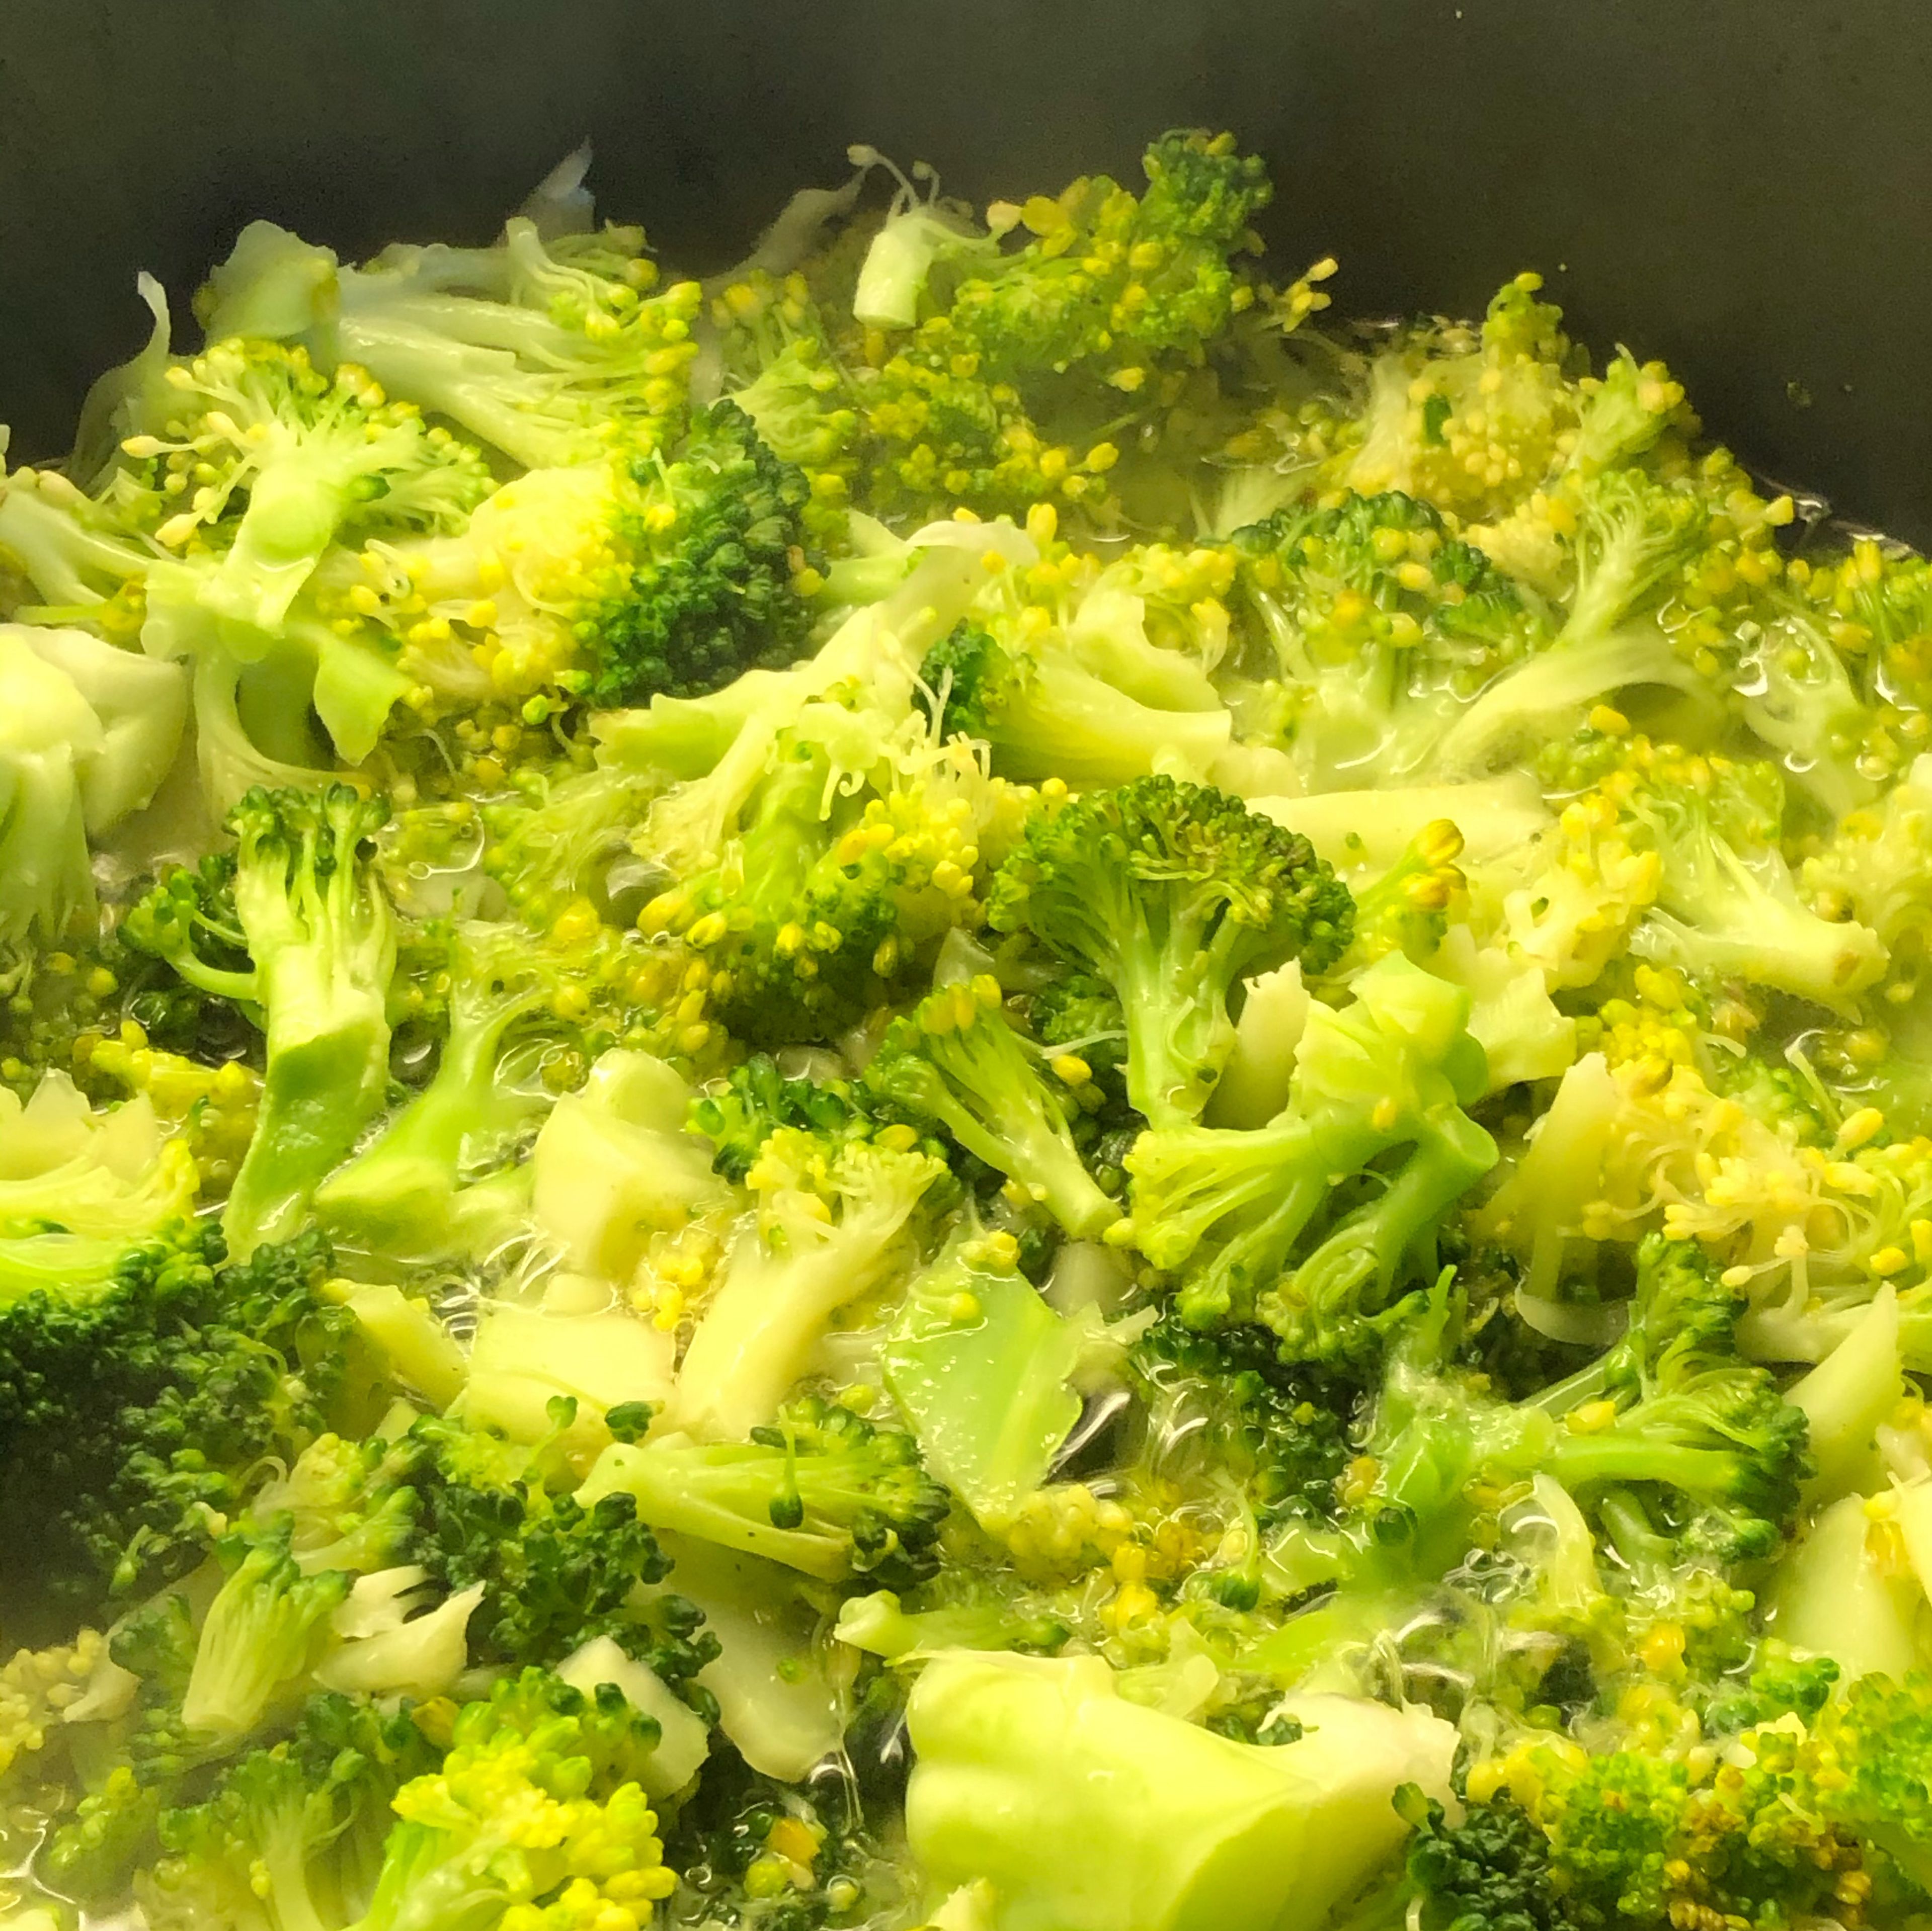 Cook the broccoli until softened with 1 tsp of salt